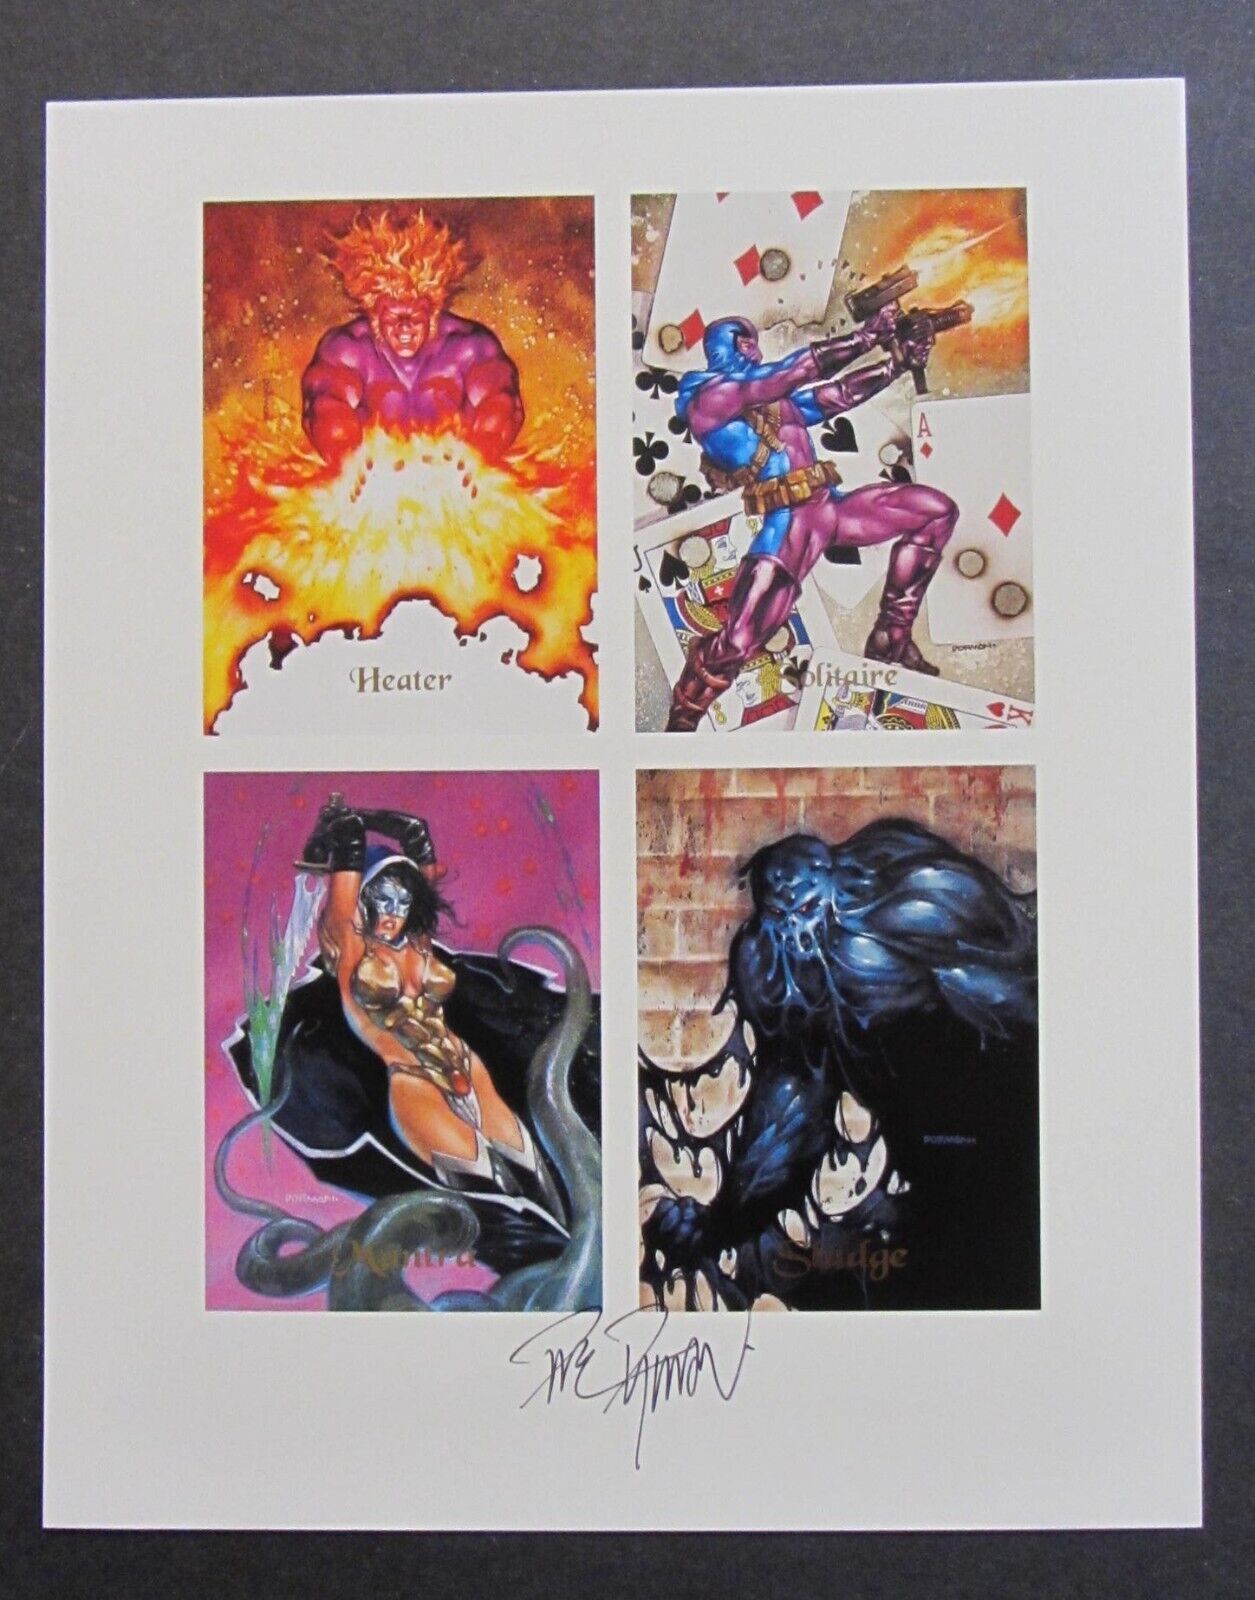 Skybox Limited Edition 1994 ULTRAVERSE EDITION SIGNED BY ARTIST DAVE DORMAN.